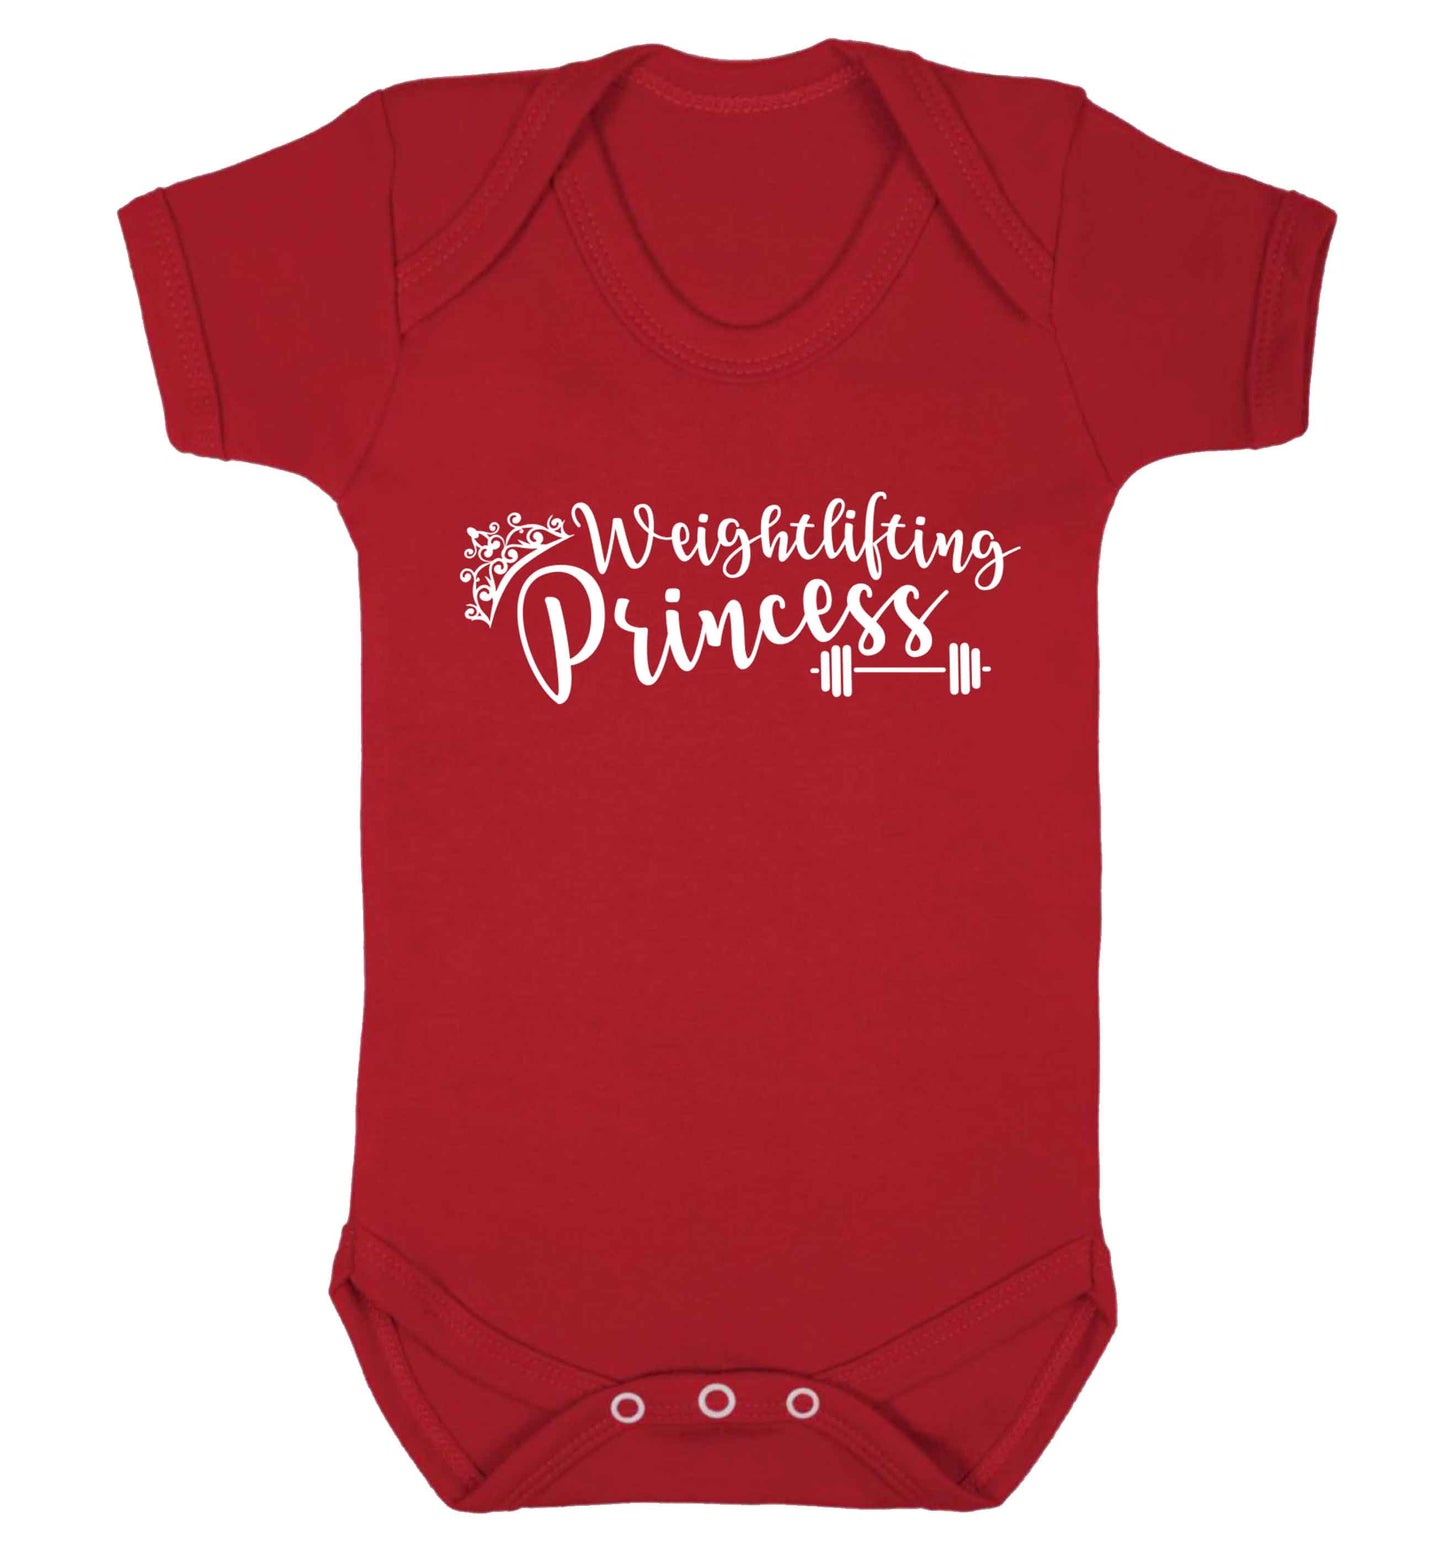 Weightlifting princess Baby Vest red 18-24 months